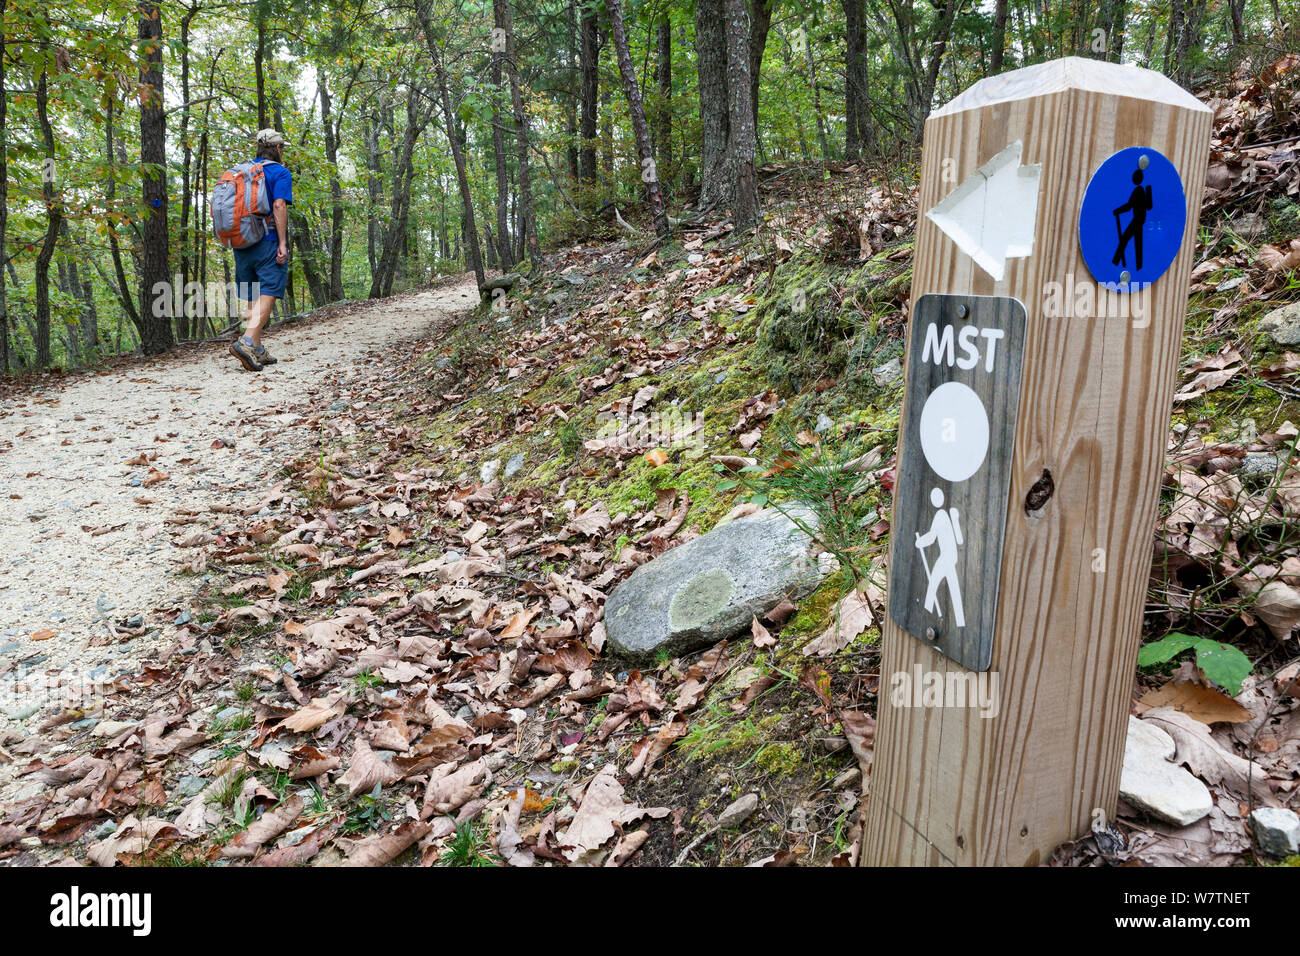 Hiker on the Grindstone Trail, part of the Mountain-To-Sea trail, in Pilot Mountain State Park. North Carolina, USA, October 2013. Model released. Stock Photo